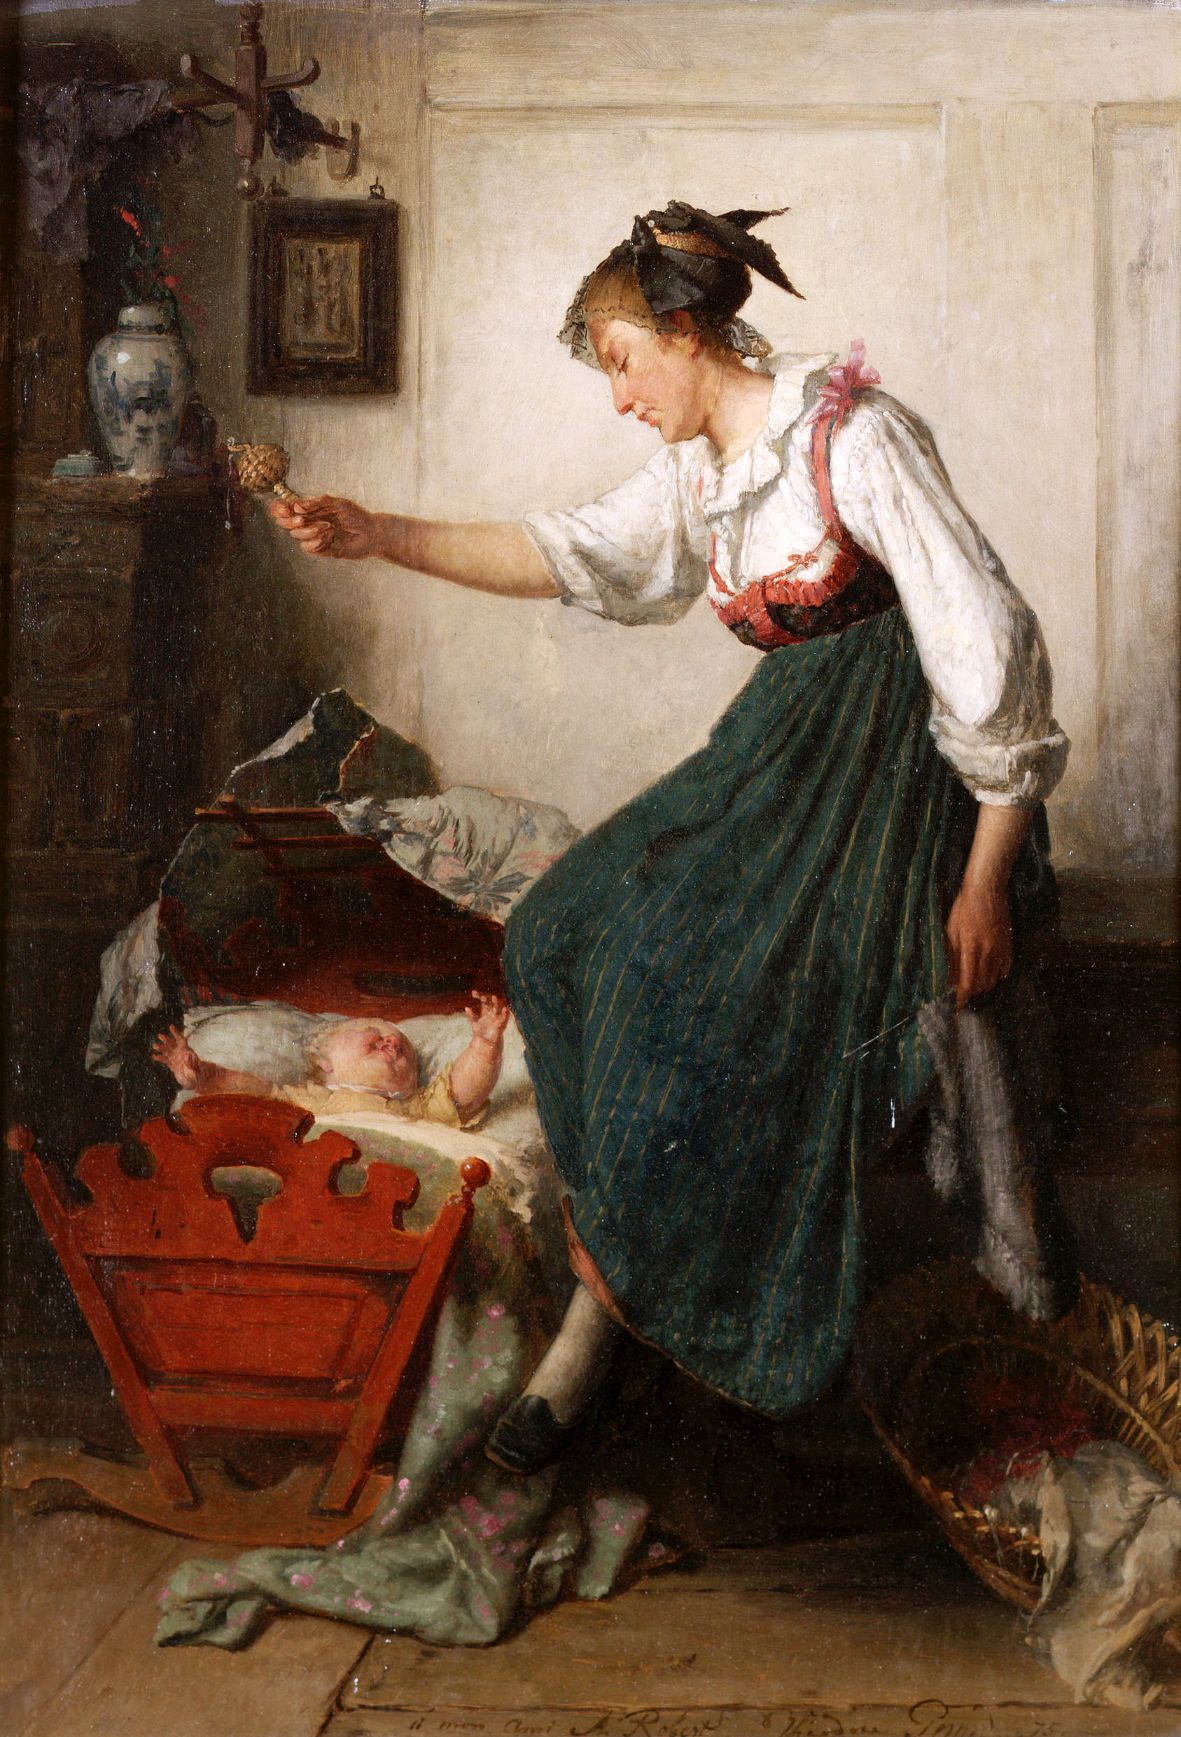 176 Theodore Gerard (1829-1895) - The new rattle, 1875